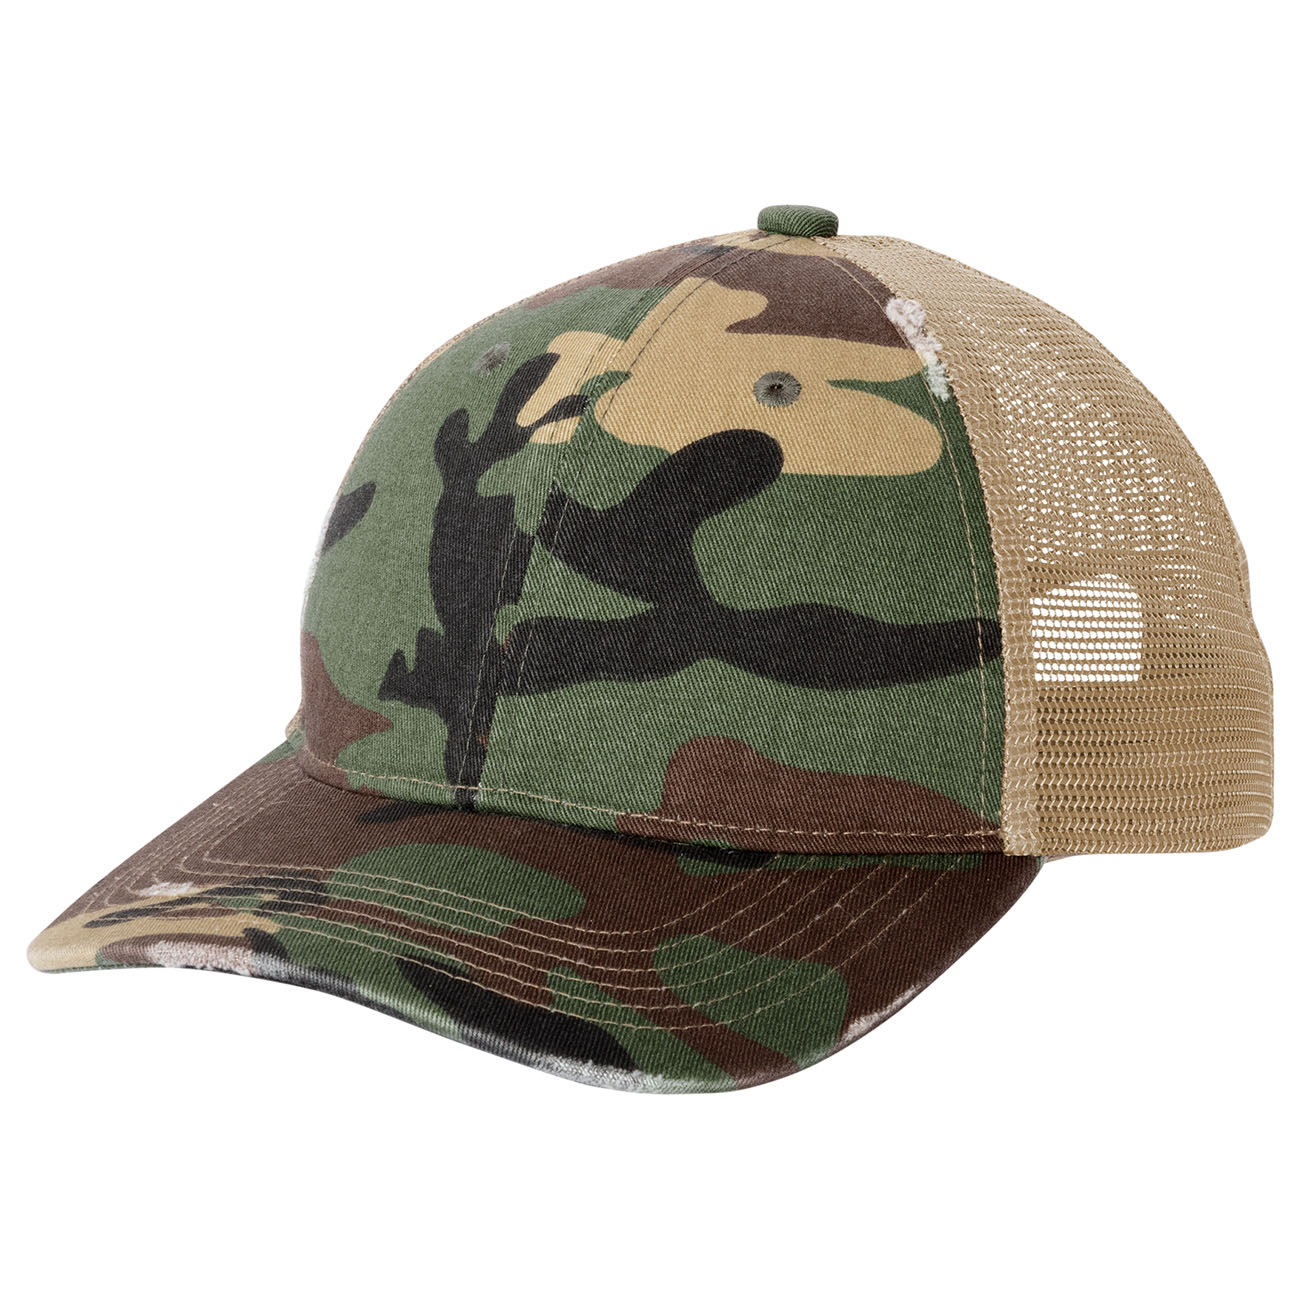 District Distressed Military Hat-One Size (Military Camo), adult Unisex, Green